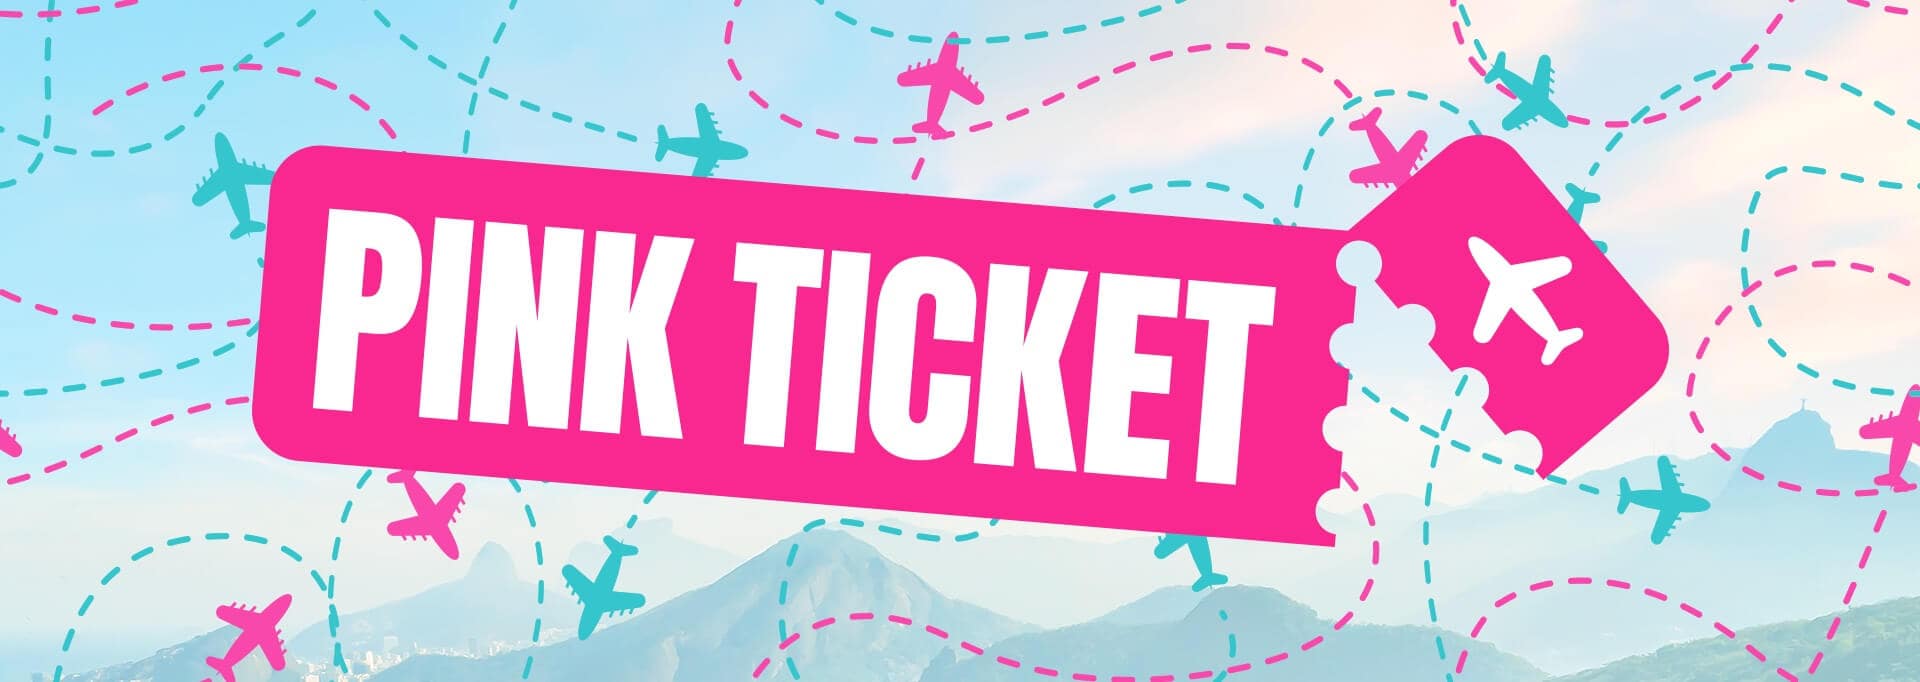 Pink Ticket | A Queer Travel Newsletter